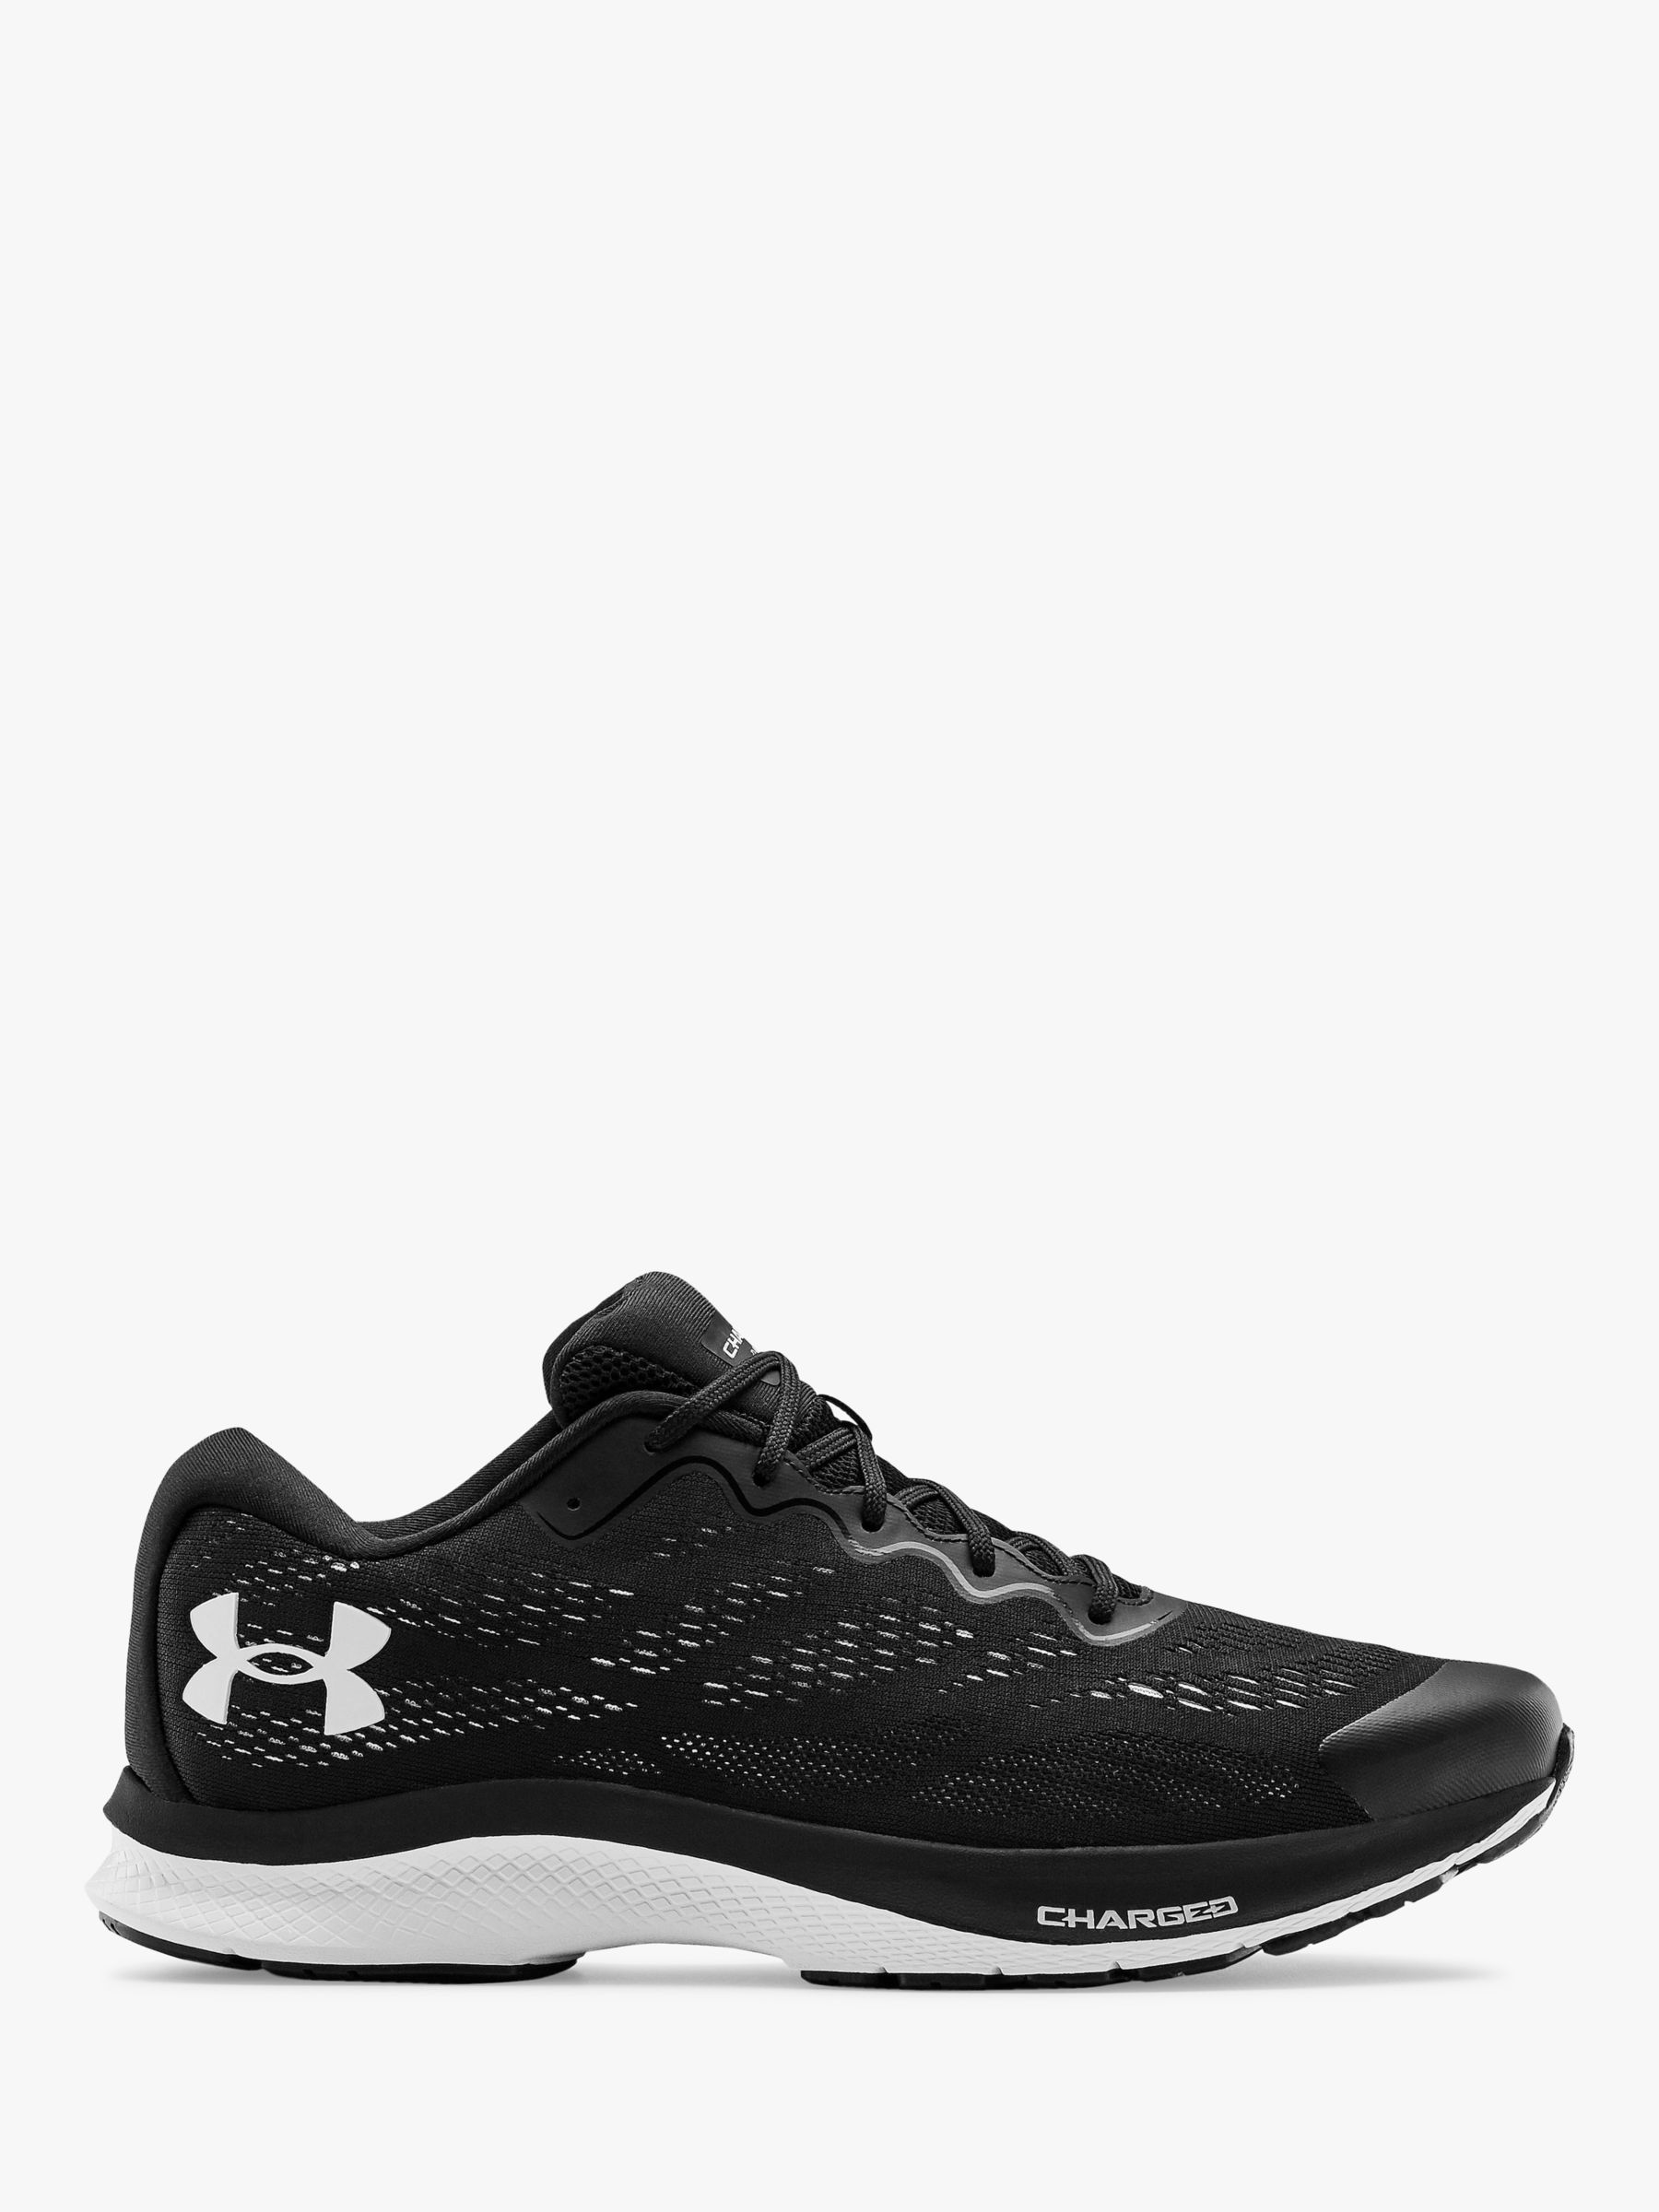 Under Armour Charged Bandit 6 Men's Running Shoes at John Lewis & Partners